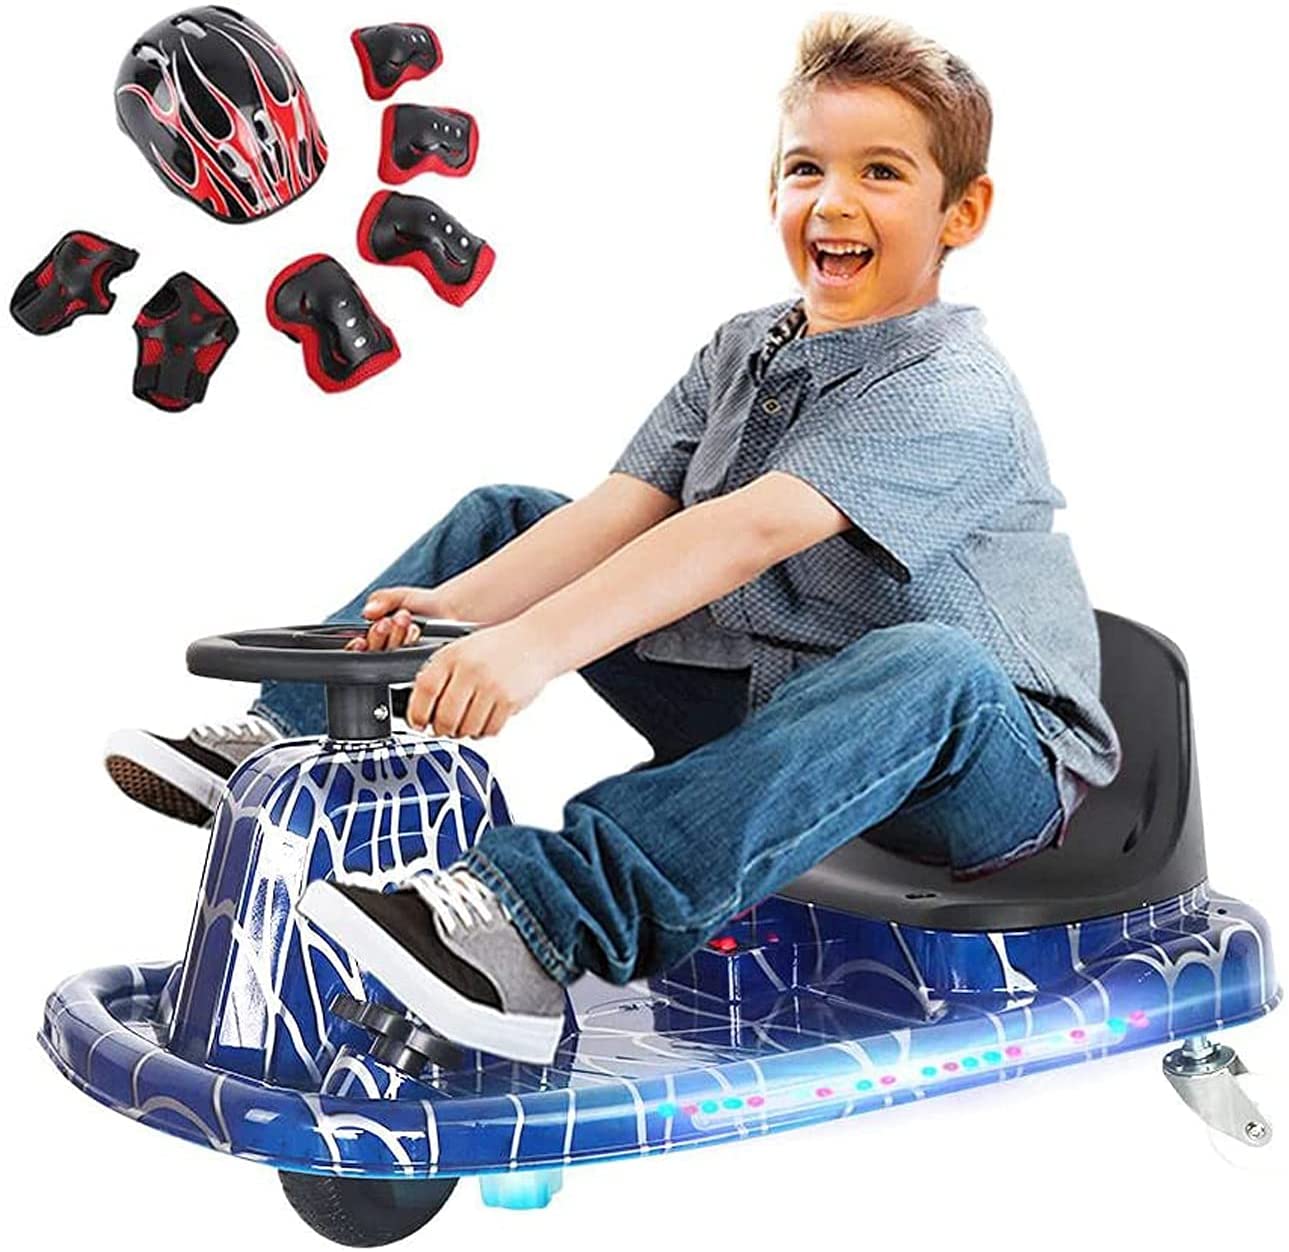 COOLBABY DP7H Drift Crazy Cart Electric Scooter Go Kart for Kids 3 Wheel Ride On Scooter Toy With LED Light & Helmet Protective Gear - COOLBABY